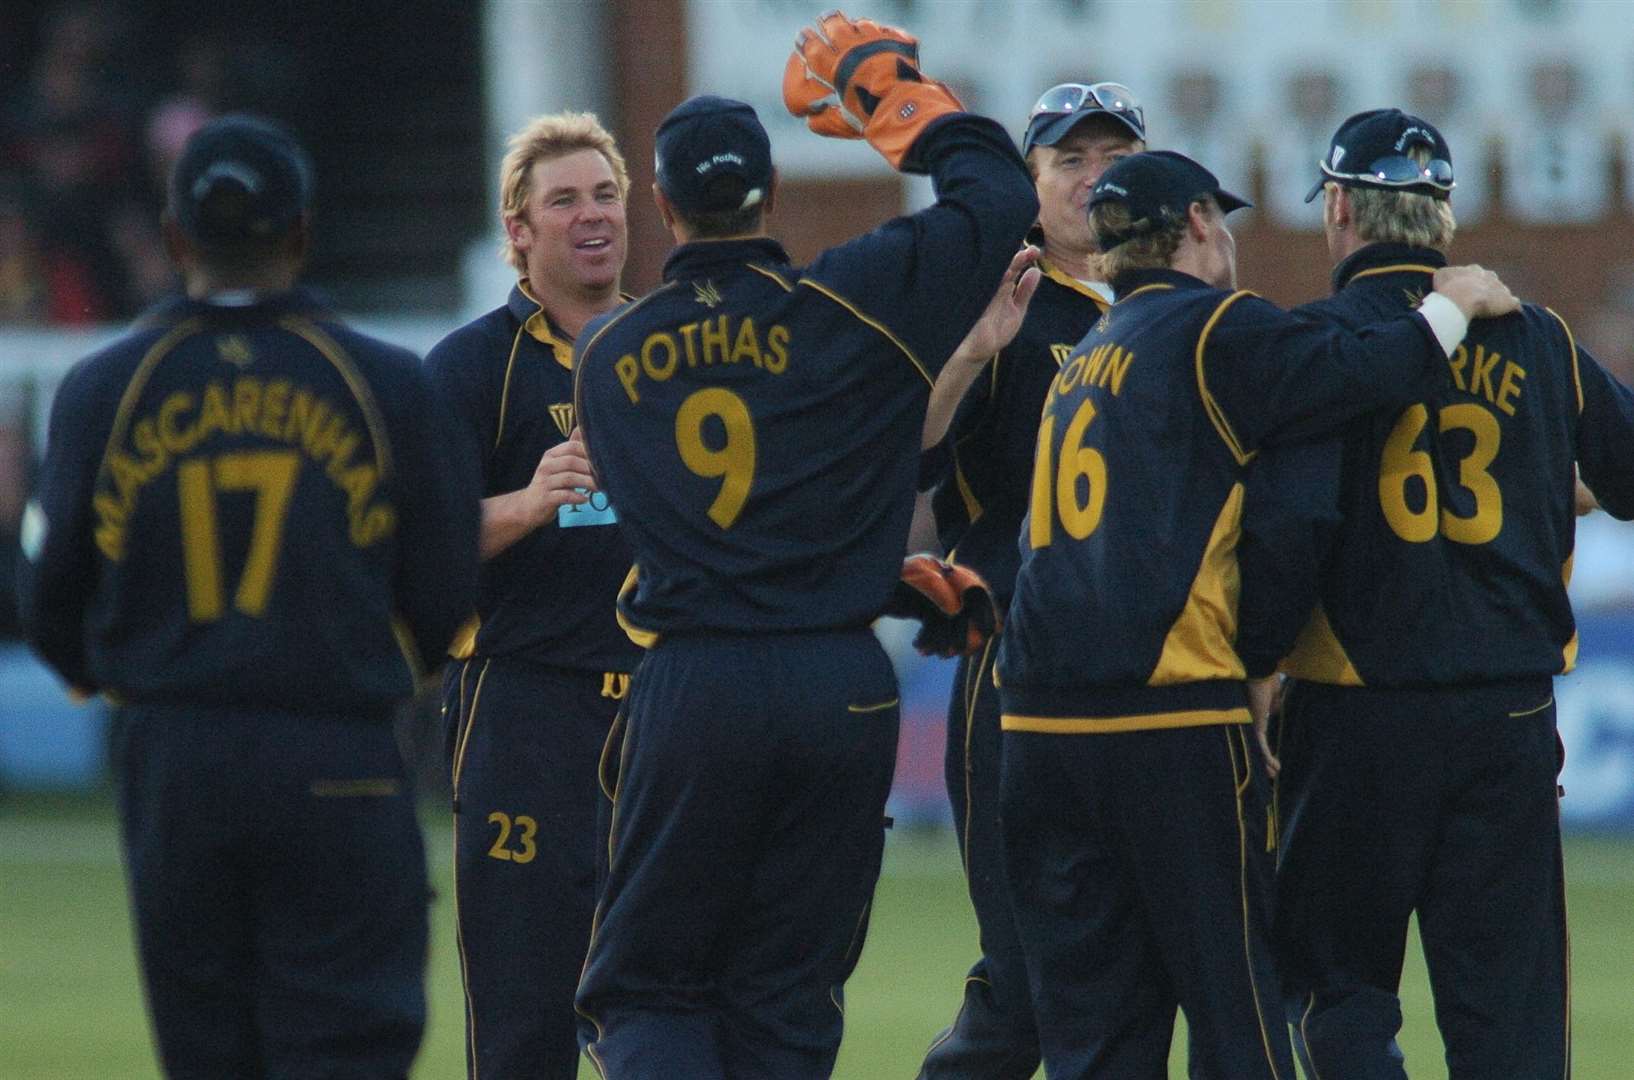 Shane Warne celebrates taking a wicket for Hampshire against Kent at Canterbury in 2004